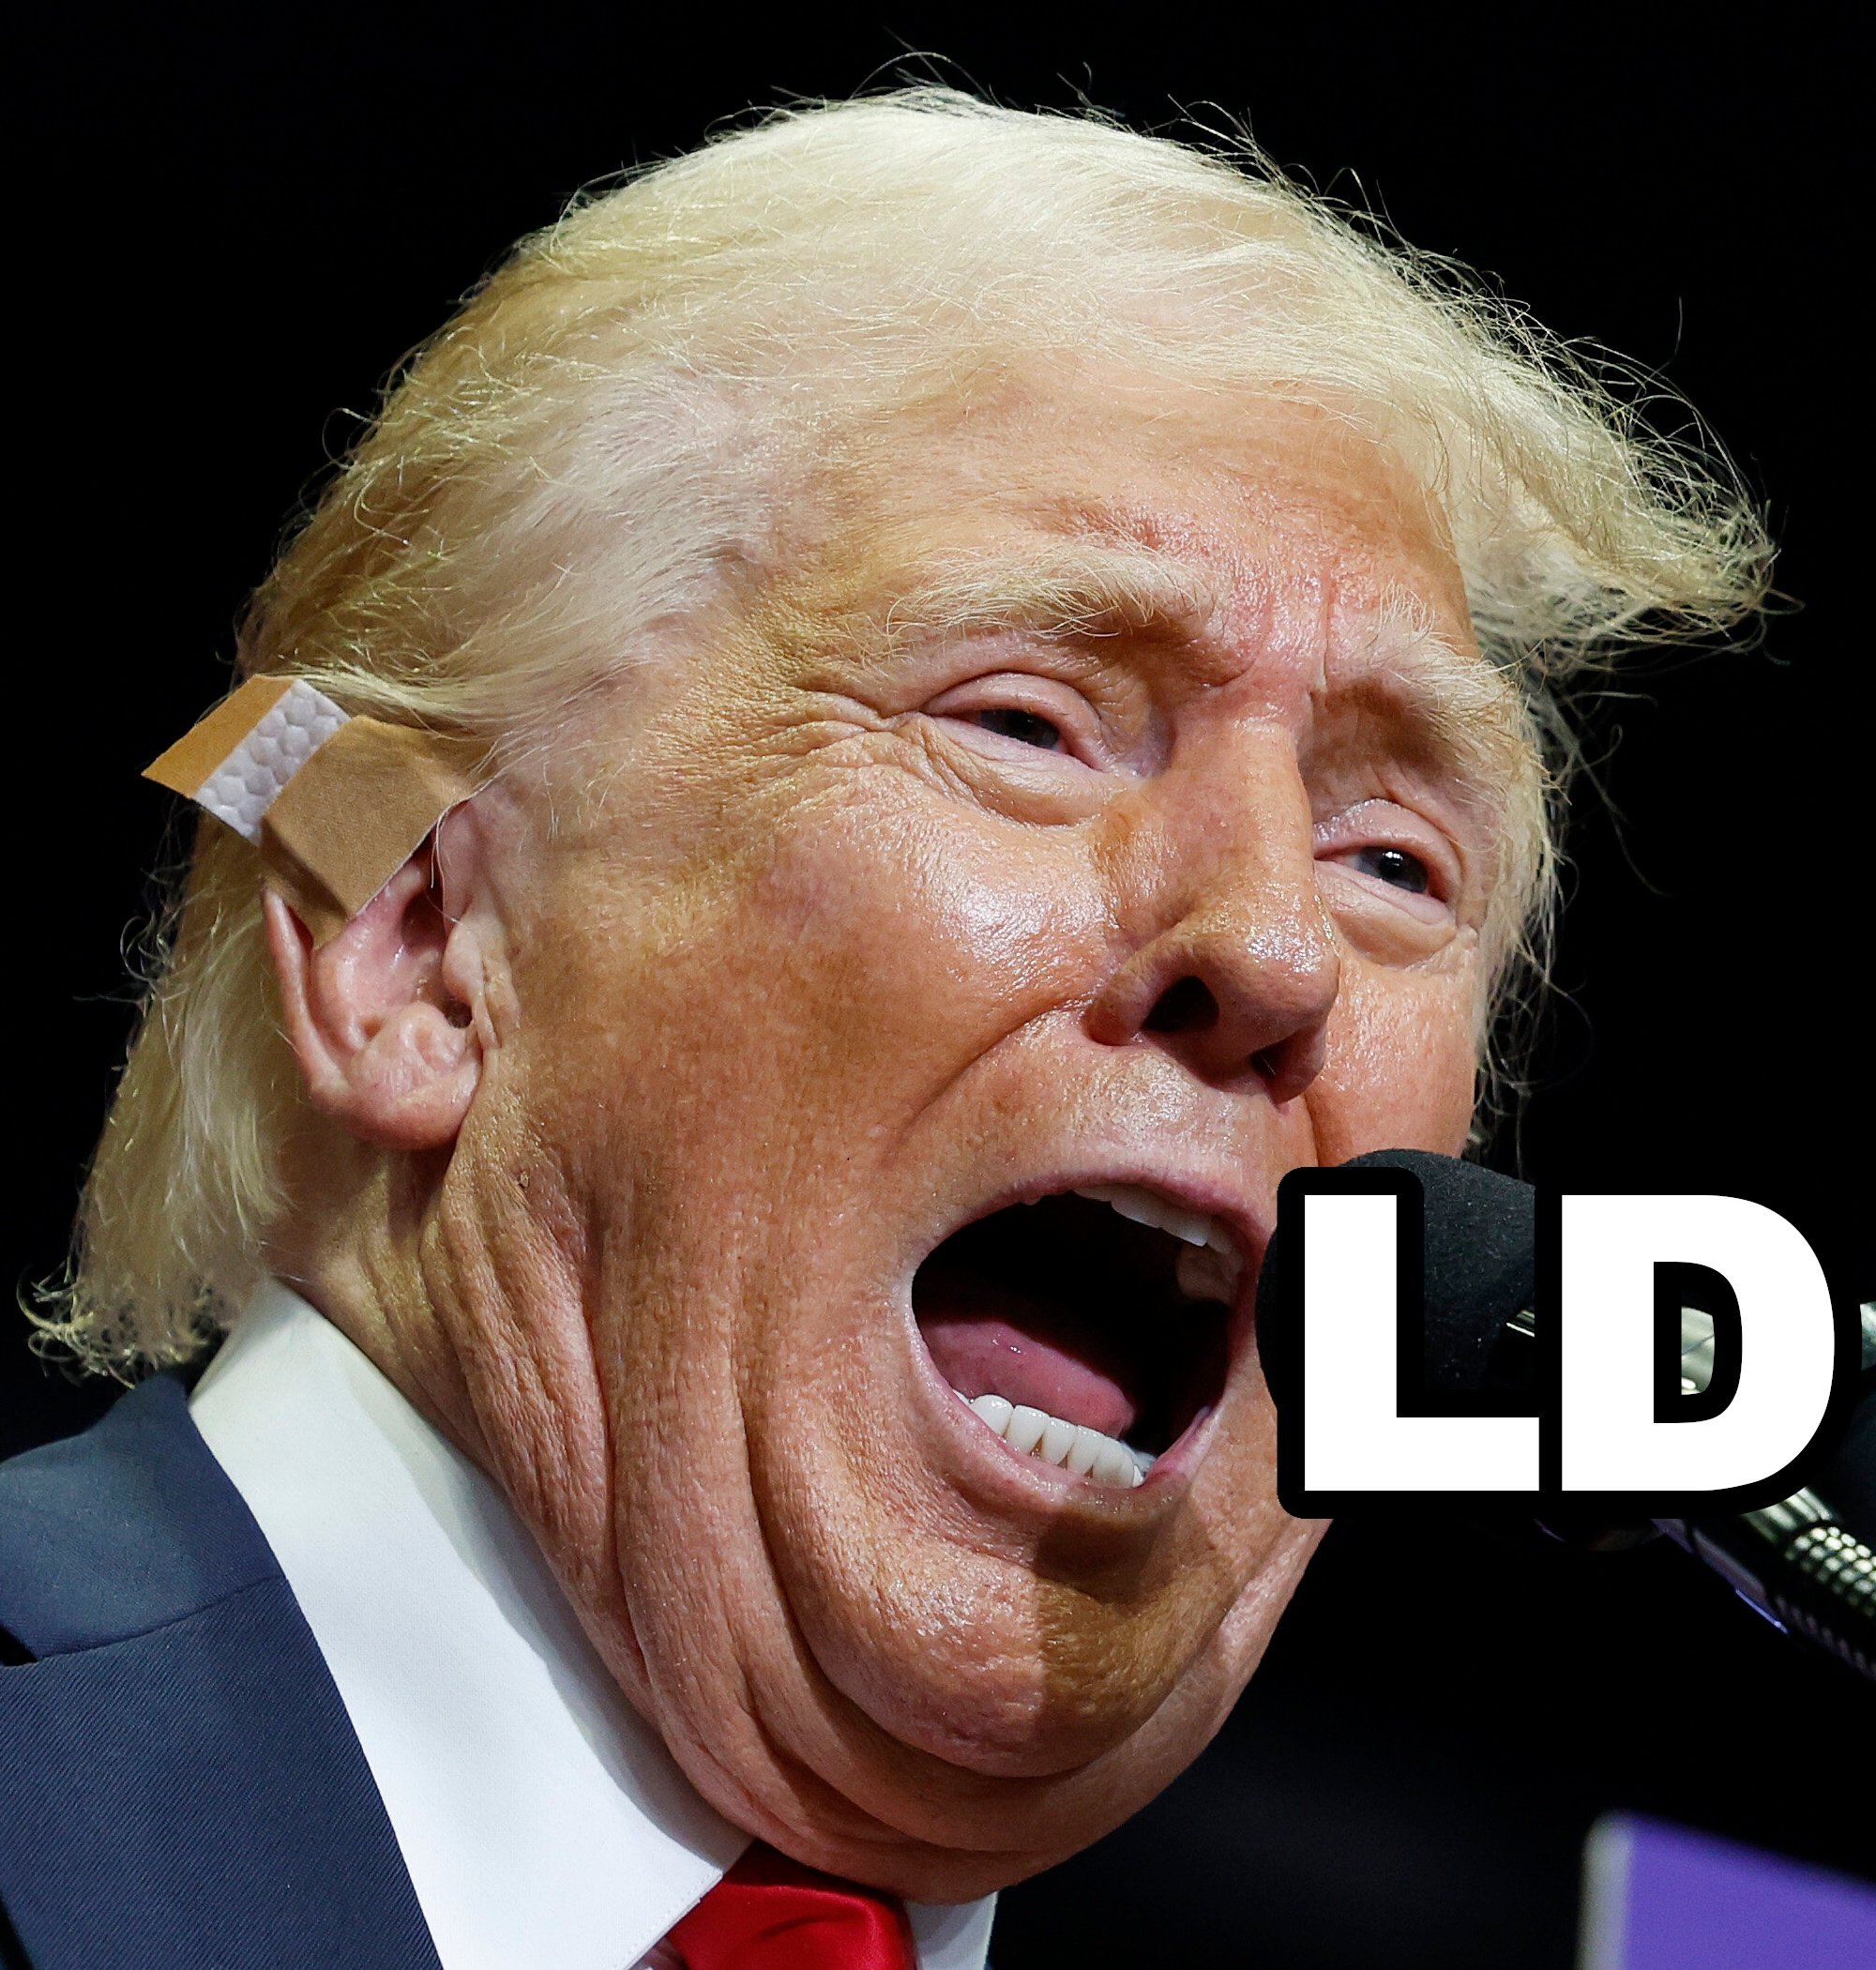 Photo of Donald Trump shouting, his mouth forming a near-perfect O shape. To the right of his O shaped mouth, the letters L and D have been added to form the word "OLD."